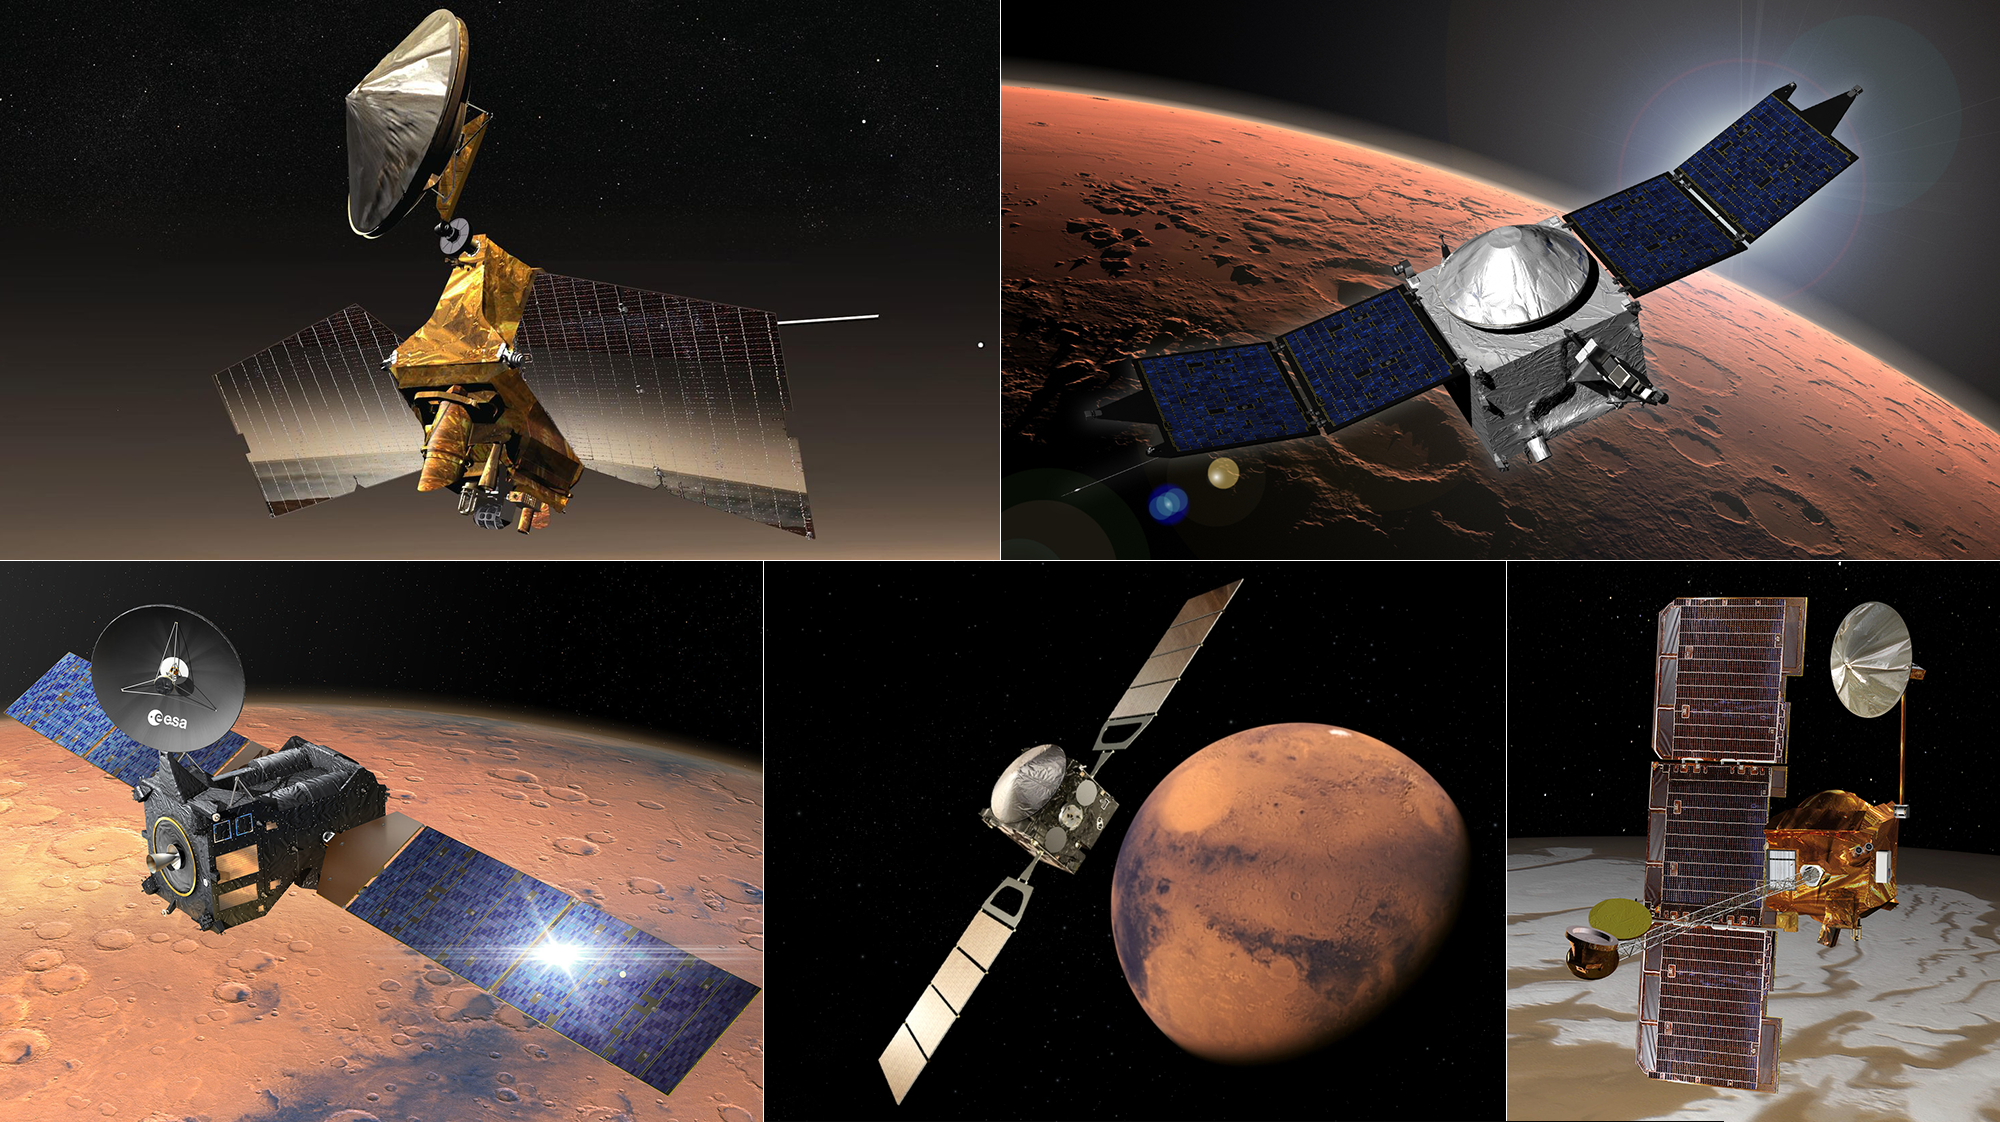 Five Mars spacecraft serve as relays for missions on the surface of the Red Planet: NASA's Mars Reconnaissance Orbiter, MAVEN and Mars Odyssey, and the European Space Agency's Mars Express and Trace Gas Orbiter.